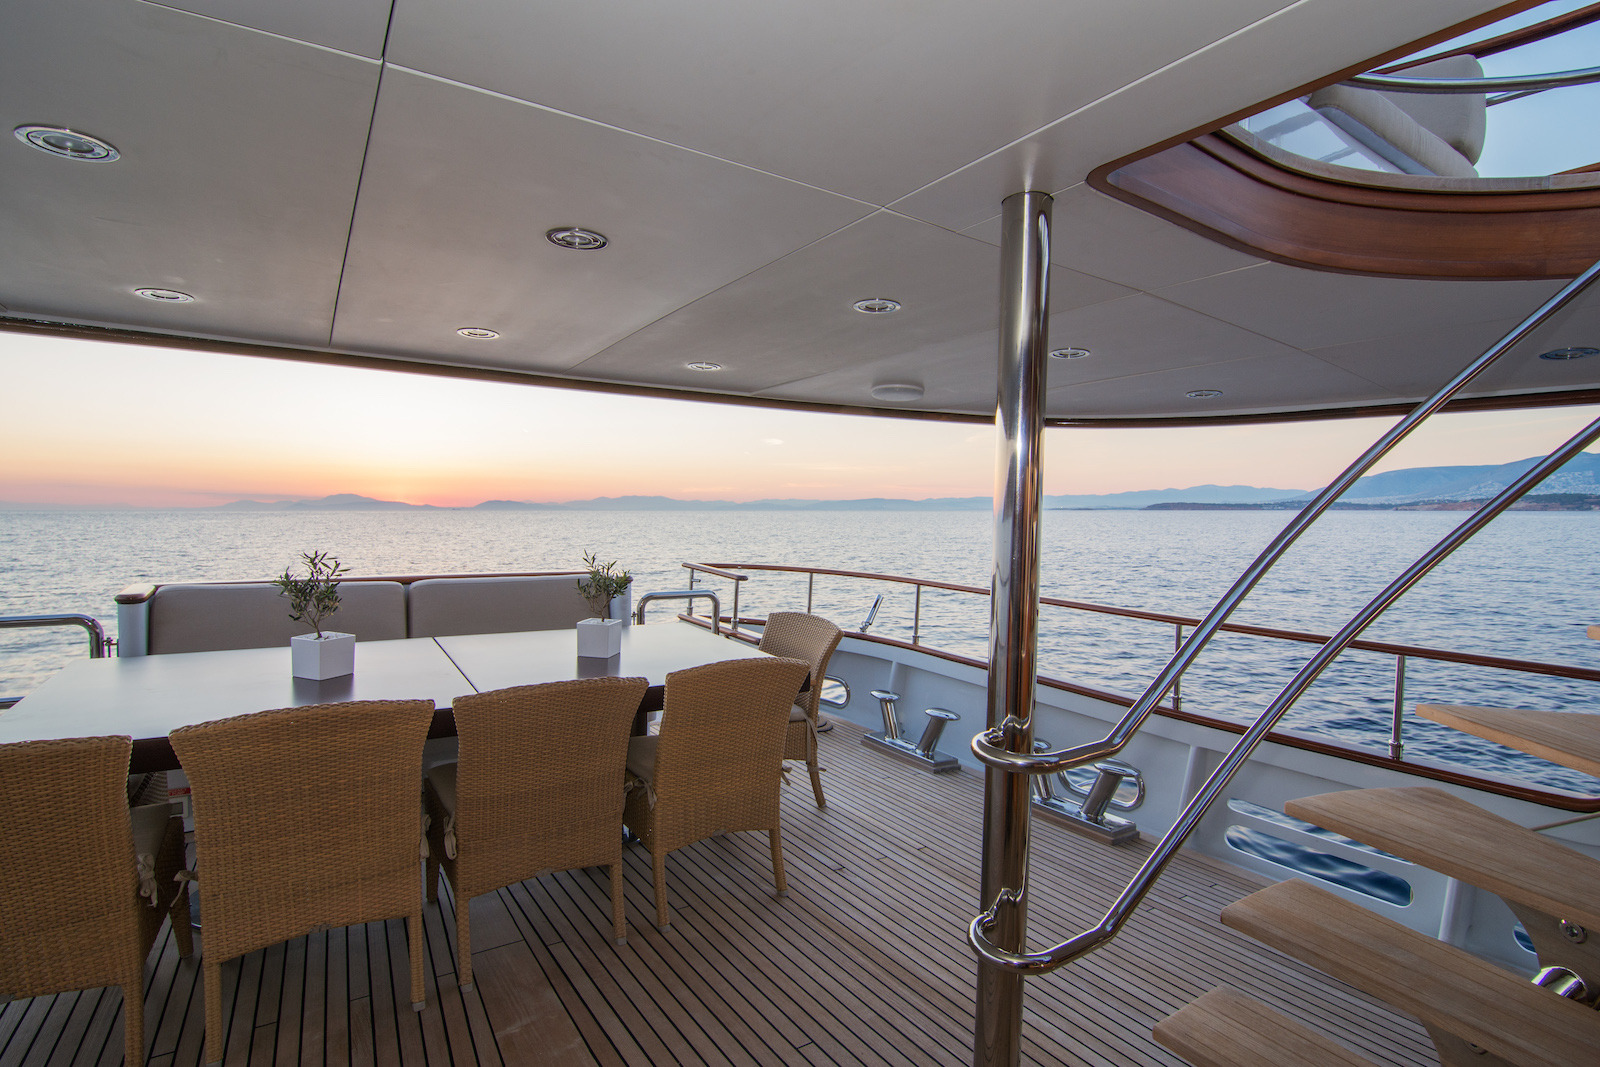 Aft Deck And Alfresco Dining Table